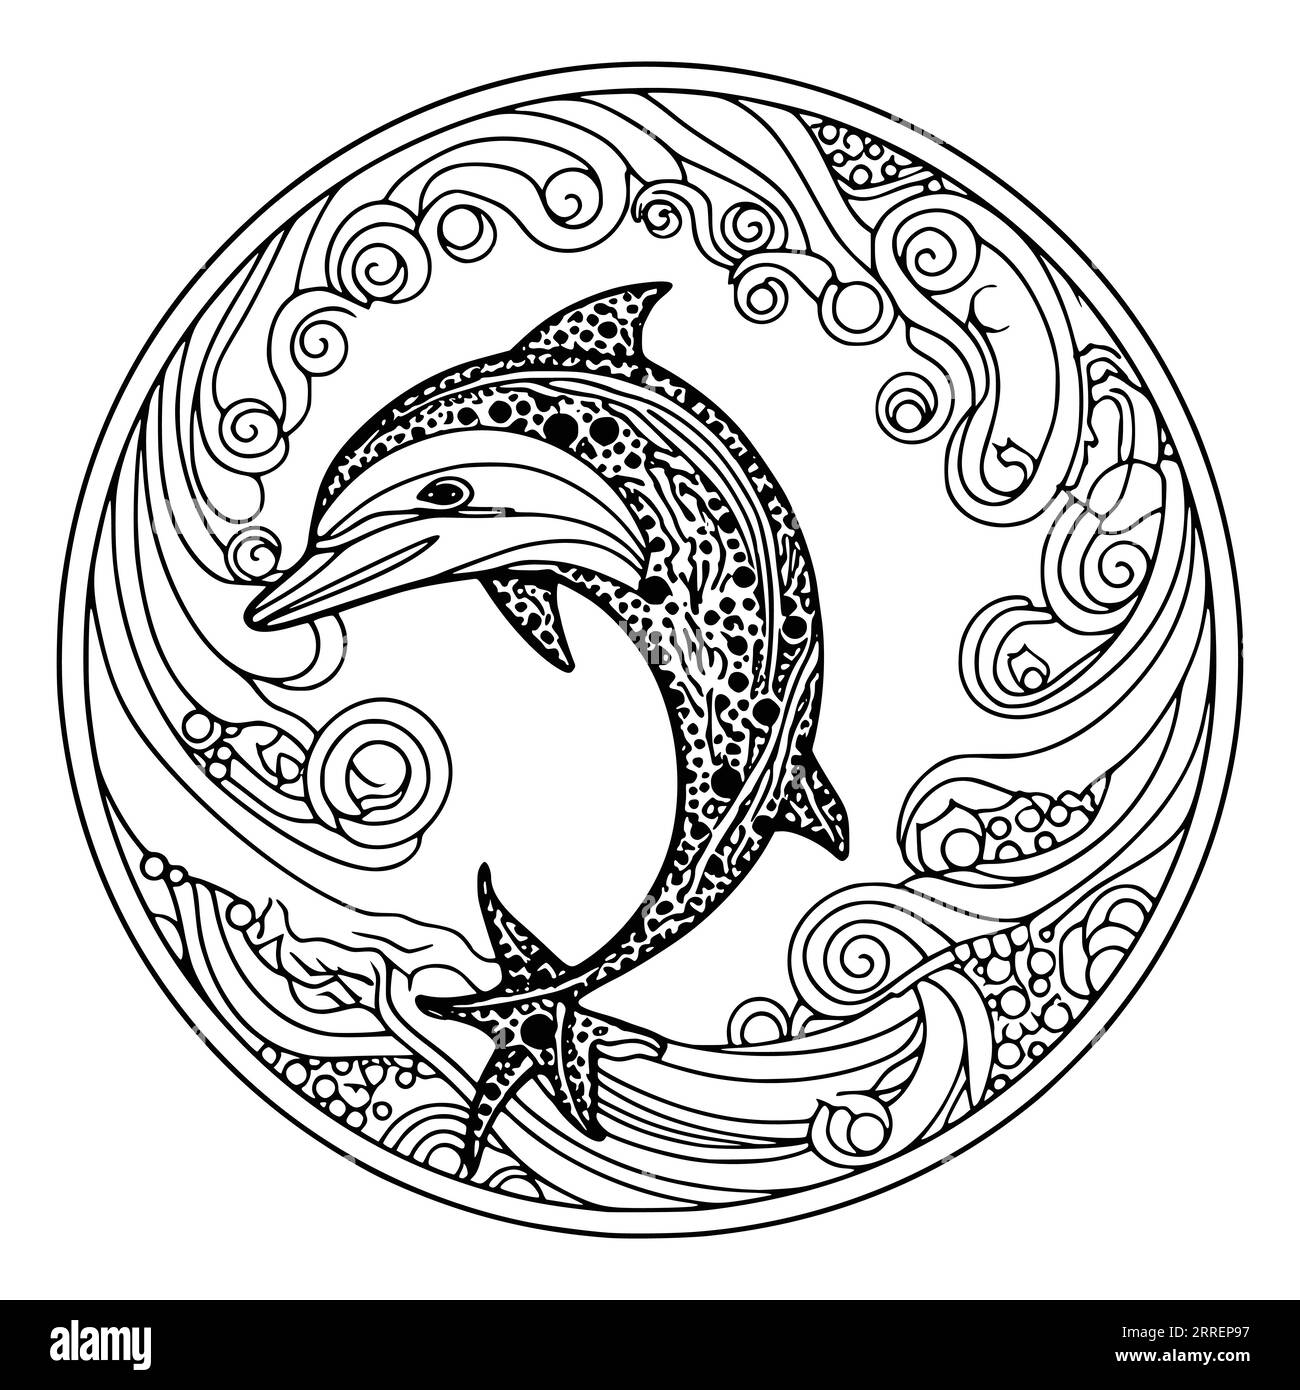 Zentangle Dolphin Coloring Page for Kids Stock Vector